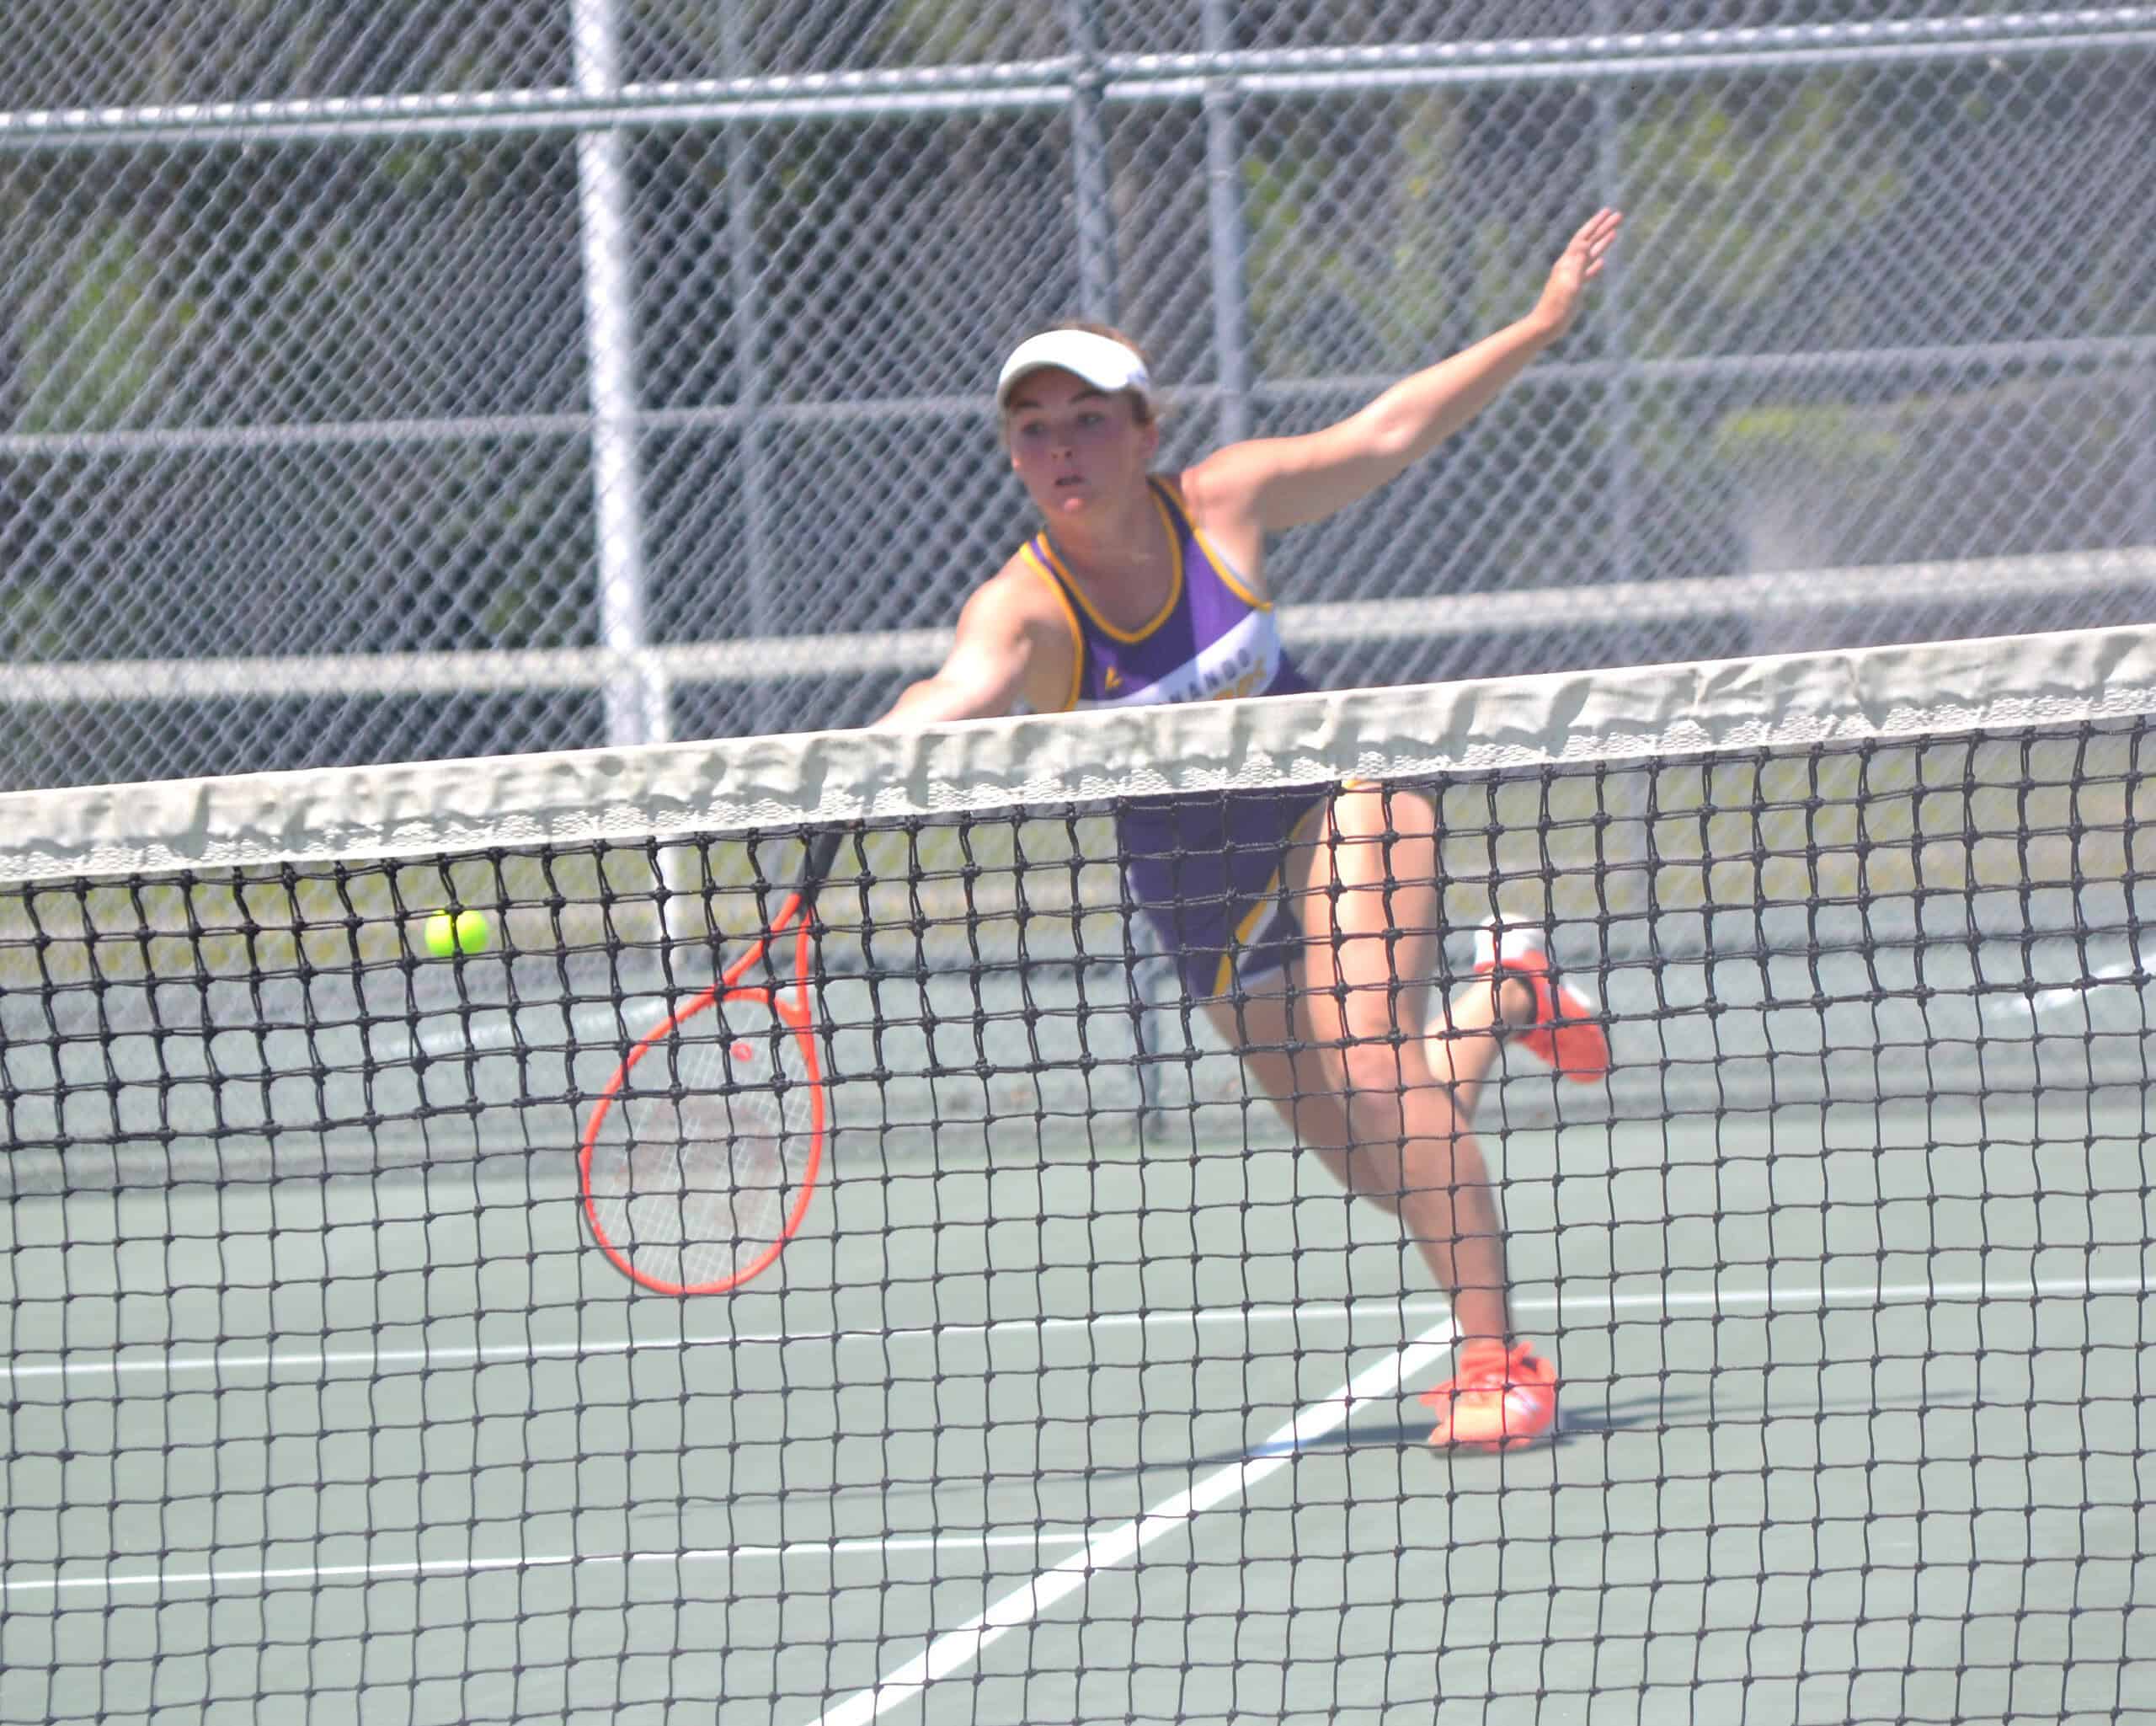 Serena Huber of Hernando High returns a shot during a No. 2 doubles match during the District 2A-6 Tournament on Wednesday in Crystal River. Photo by Chris Bernhardt Jr.